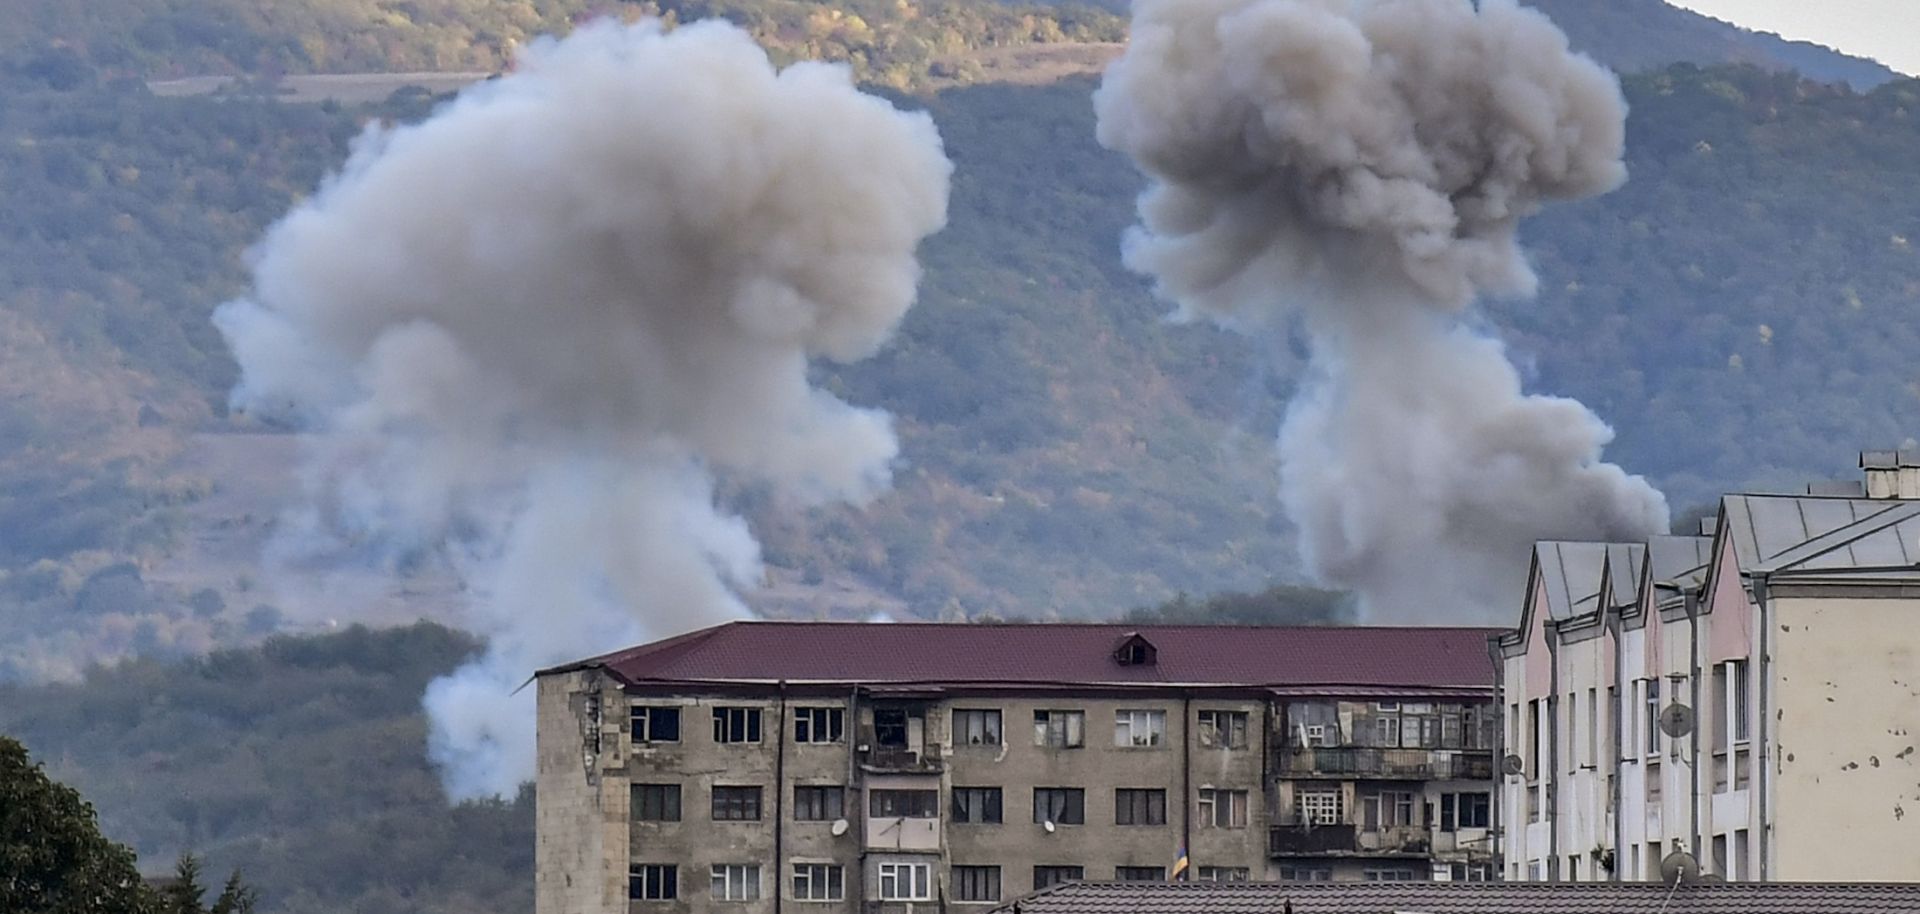 Smoke rises after shelling in Stepanakert on Oct. 9, 2020, during ongoing fighting between Armenia and Azerbaijan over the disputed region of Nagorno-Karabakh.